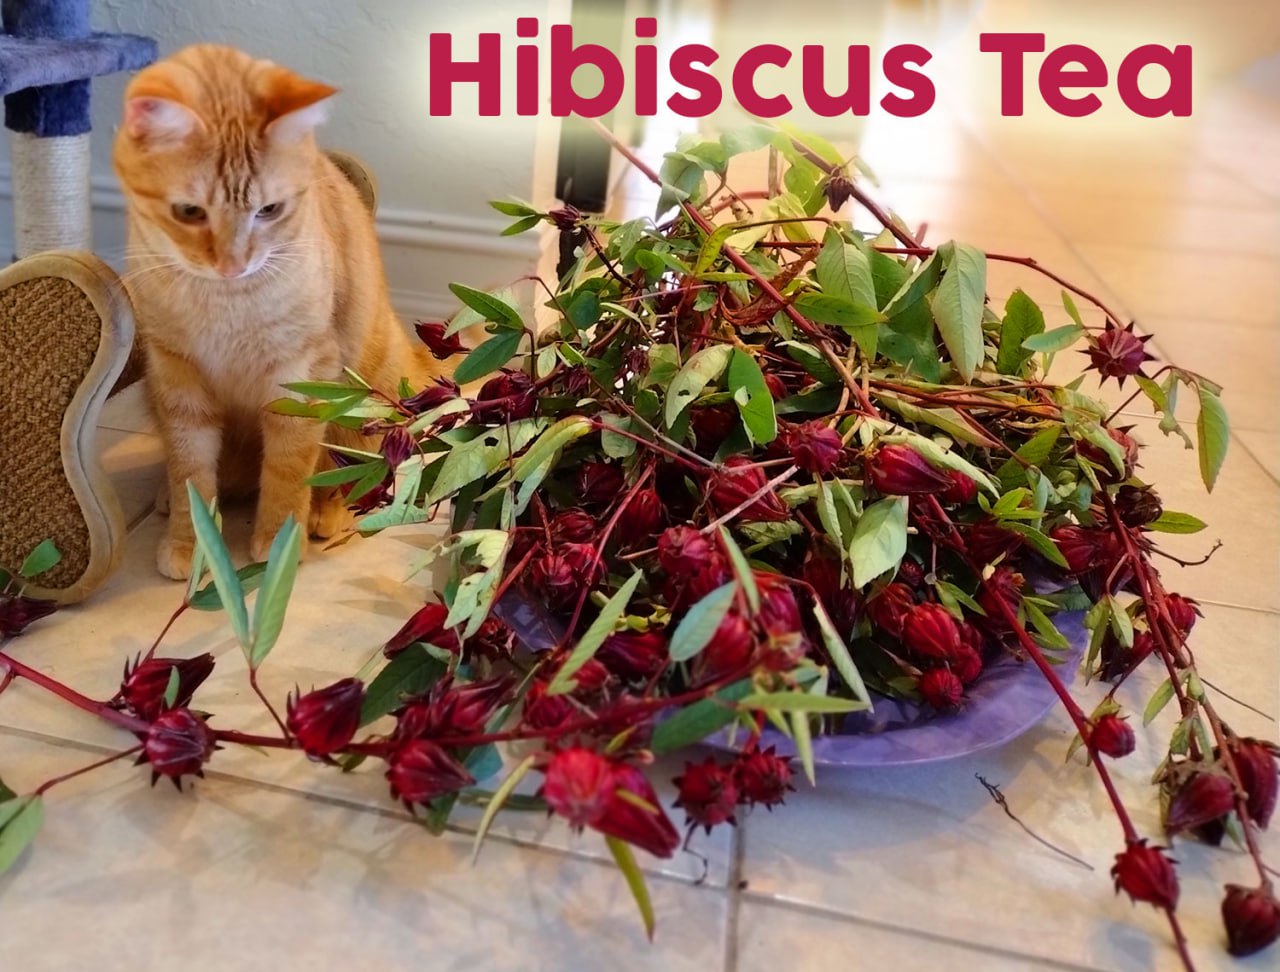 Did you know that you can eat and drink Hibiscus plants?